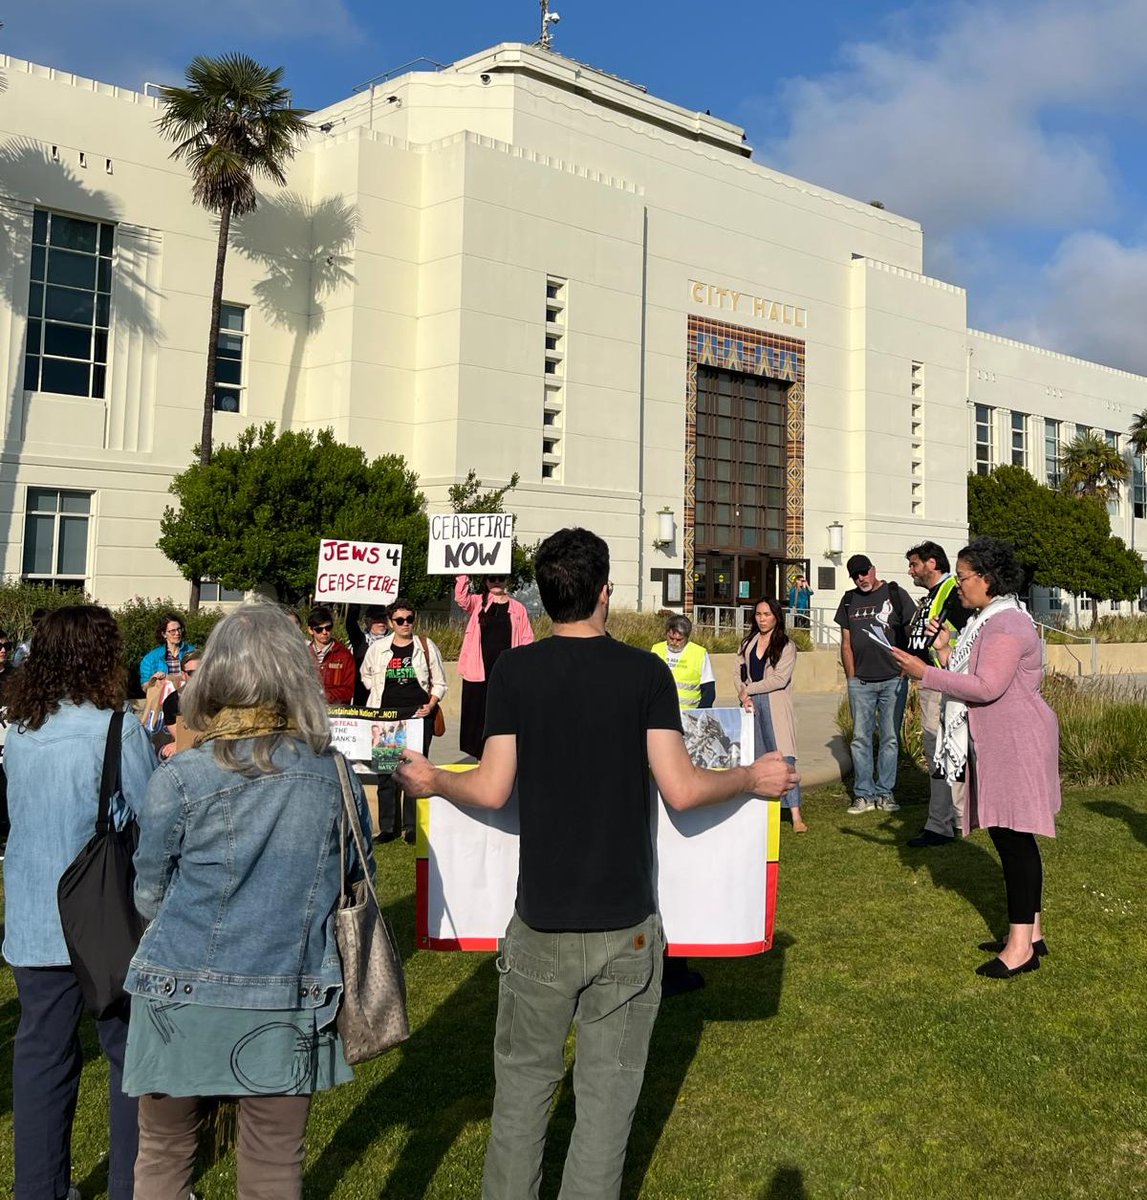 🔥RIGHT NOW: Jews & allies gather outside Santa Monica City Hall in support of a #ceasefire resolution that the City Council will be voting on tonight